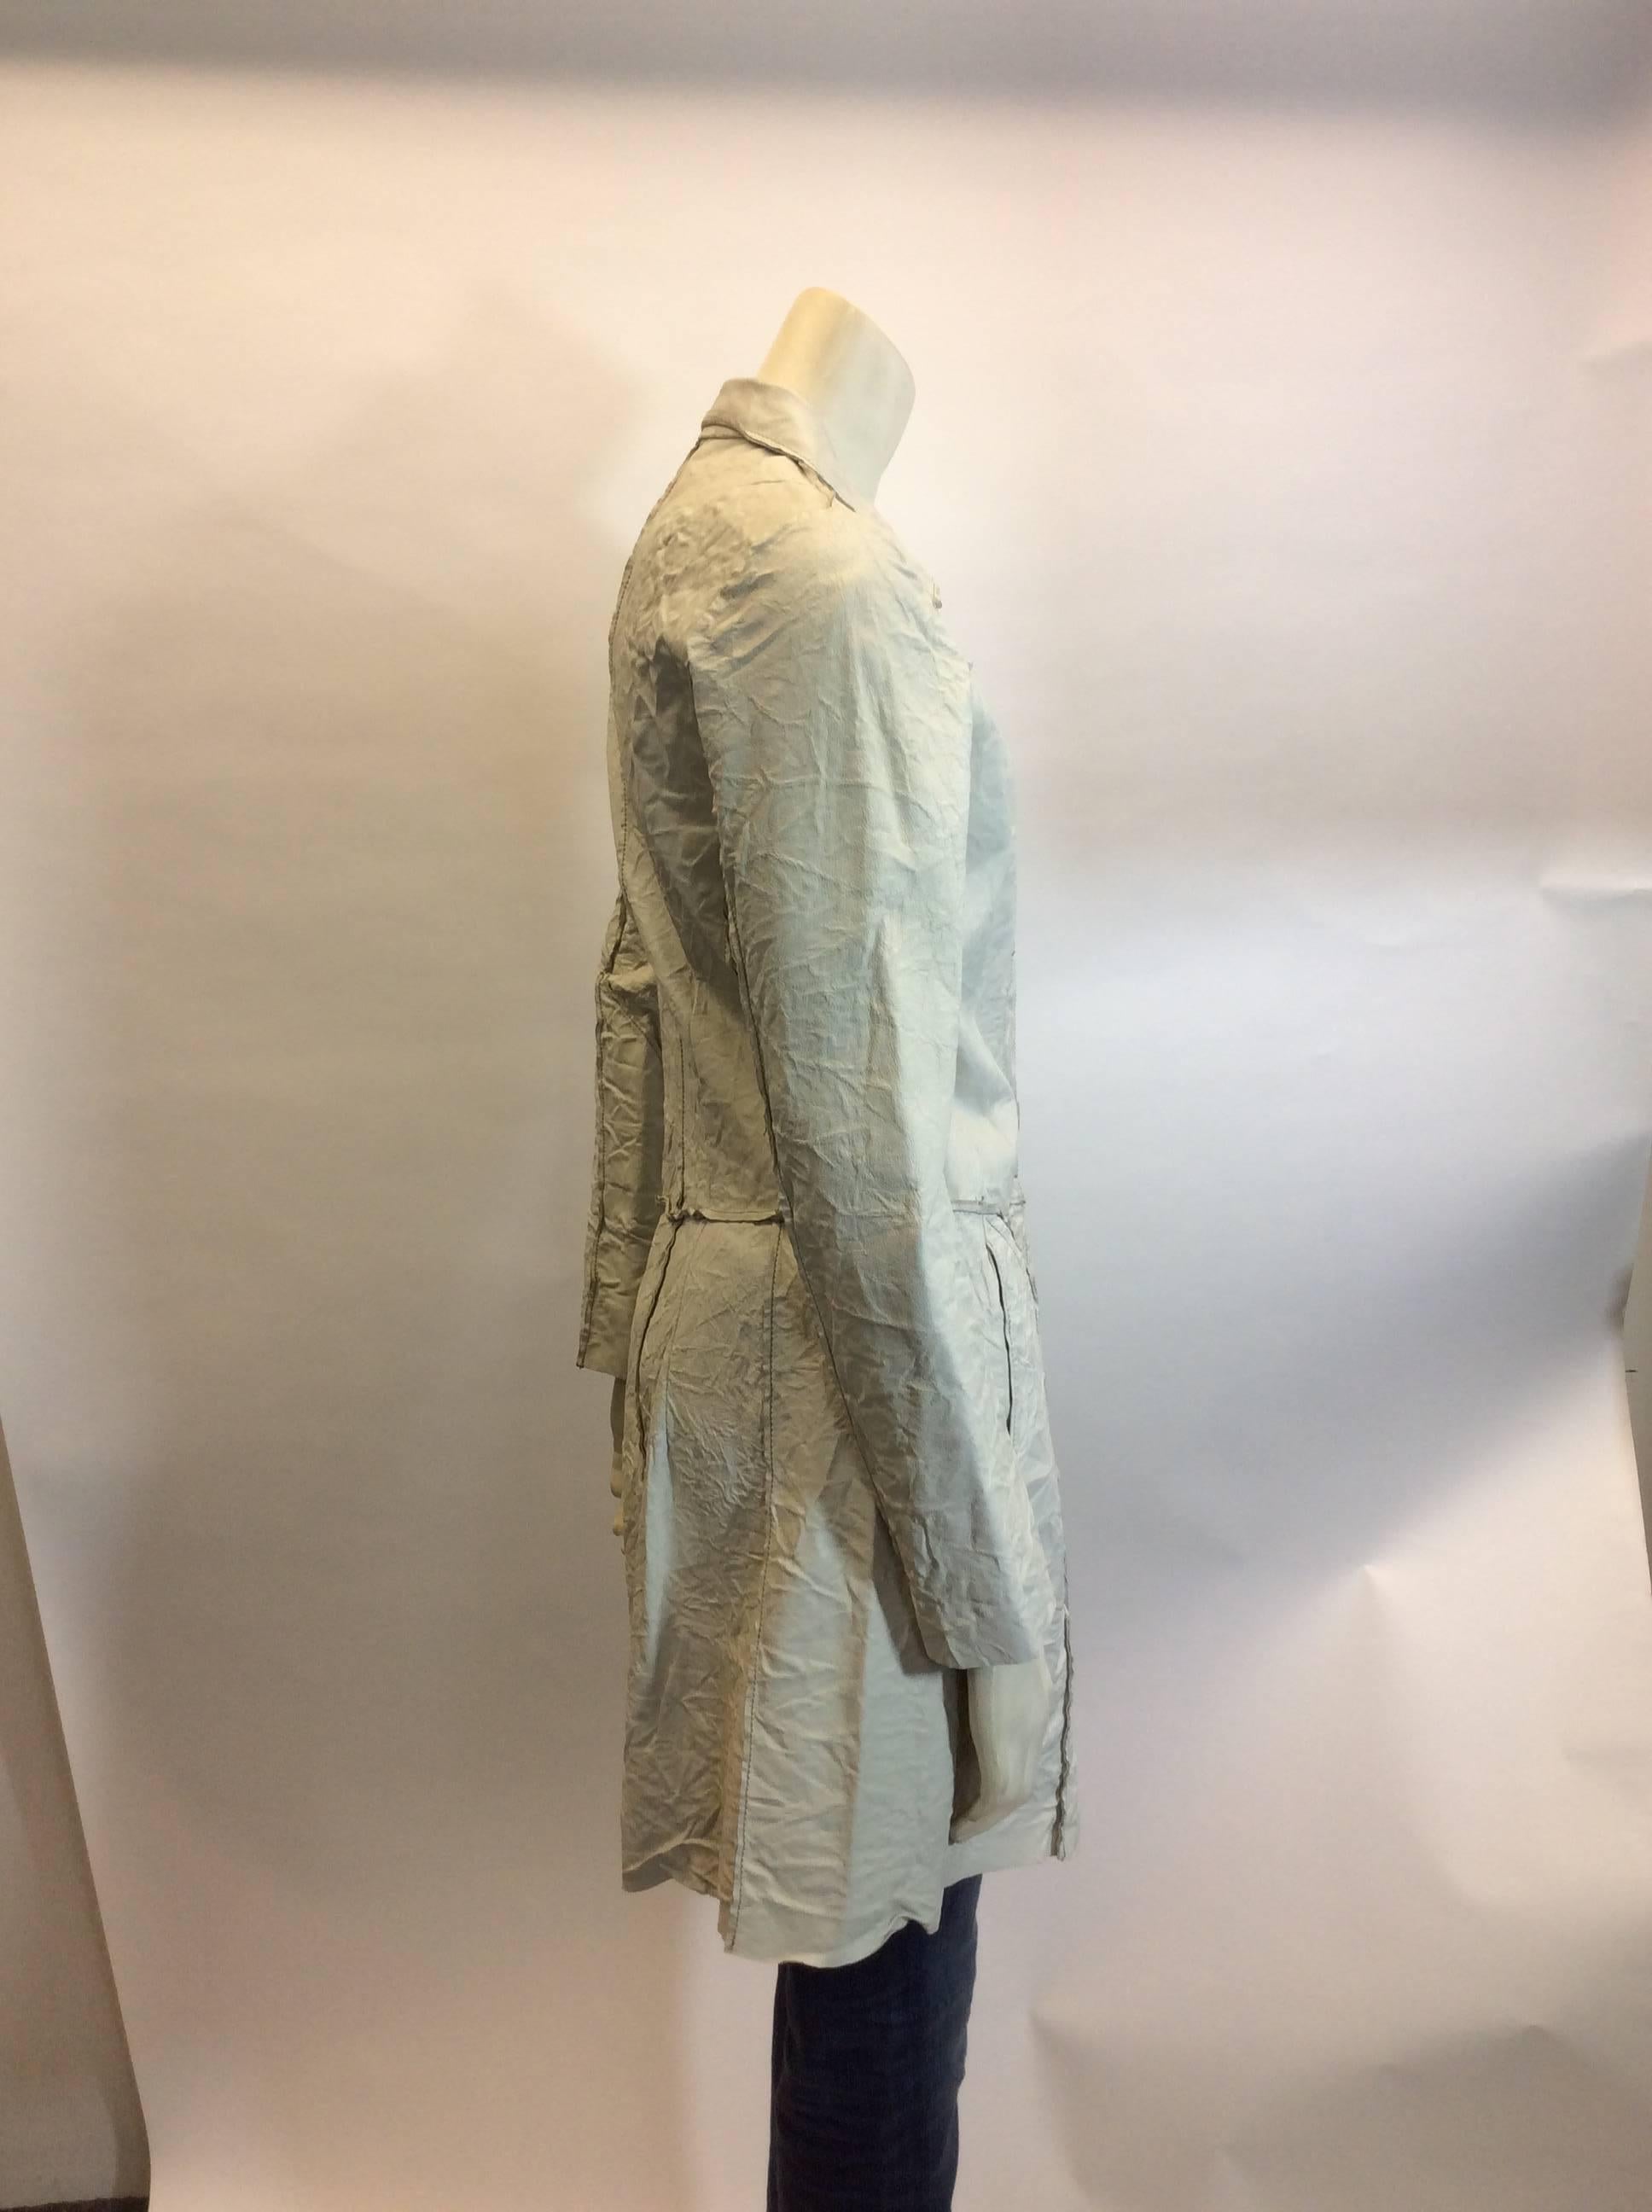 Poleci Cream Crinkle Leather Jacket In Excellent Condition For Sale In Narberth, PA